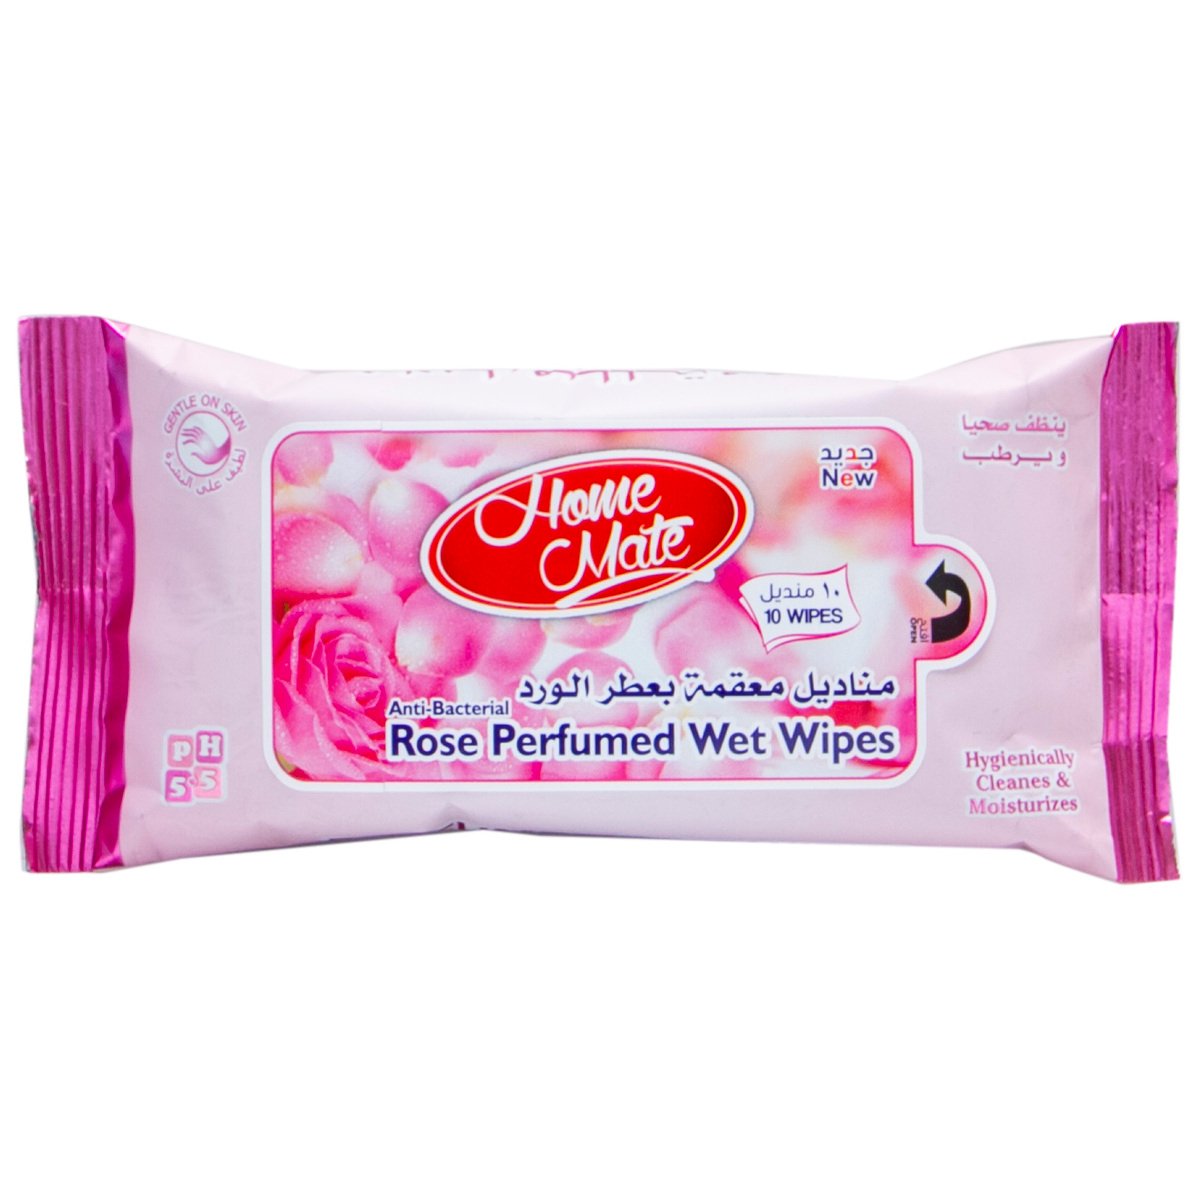 Buy Home Mate Rose Perfumed Wet Wipes 10pcs Online at Best Price | Travel Tissue &Wipes | Lulu Kuwait in Kuwait